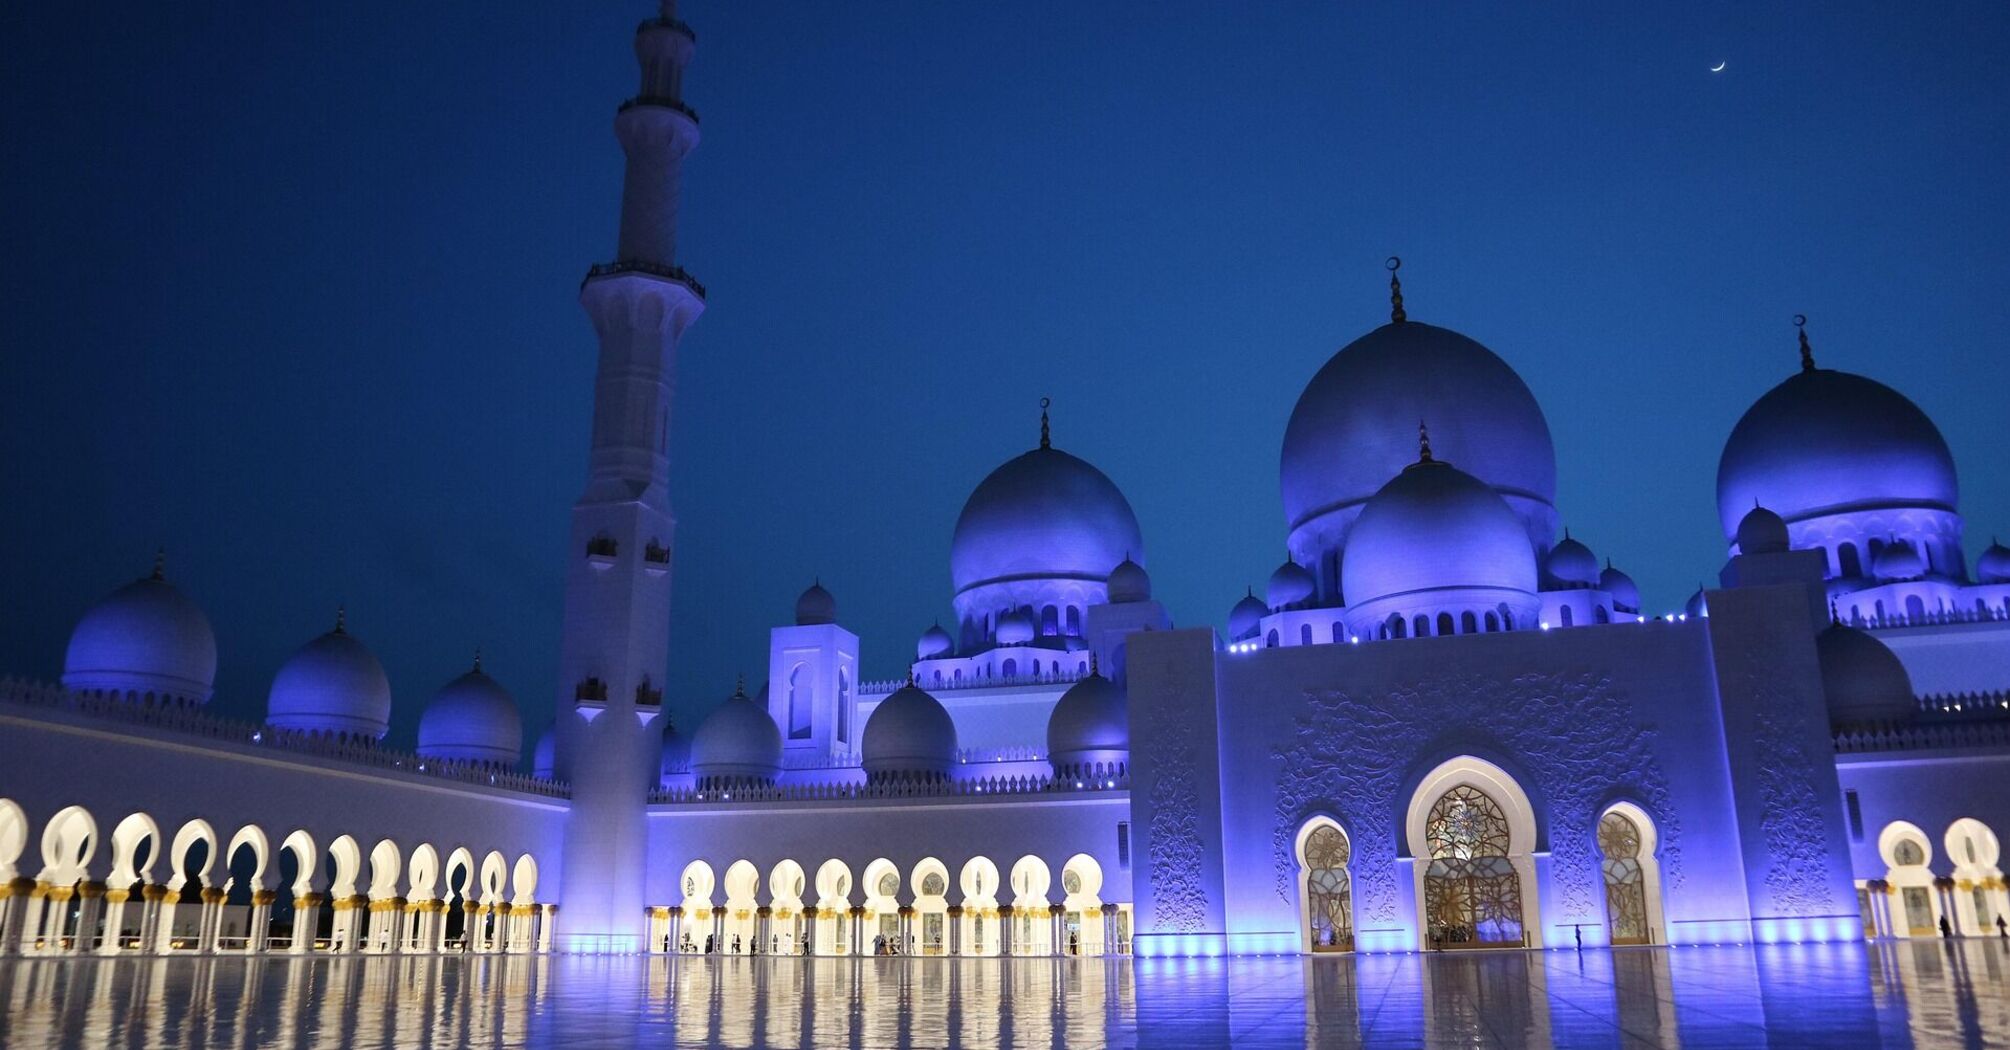 Sheikh Zayed Grand Mosque in Abu Dhabi at night